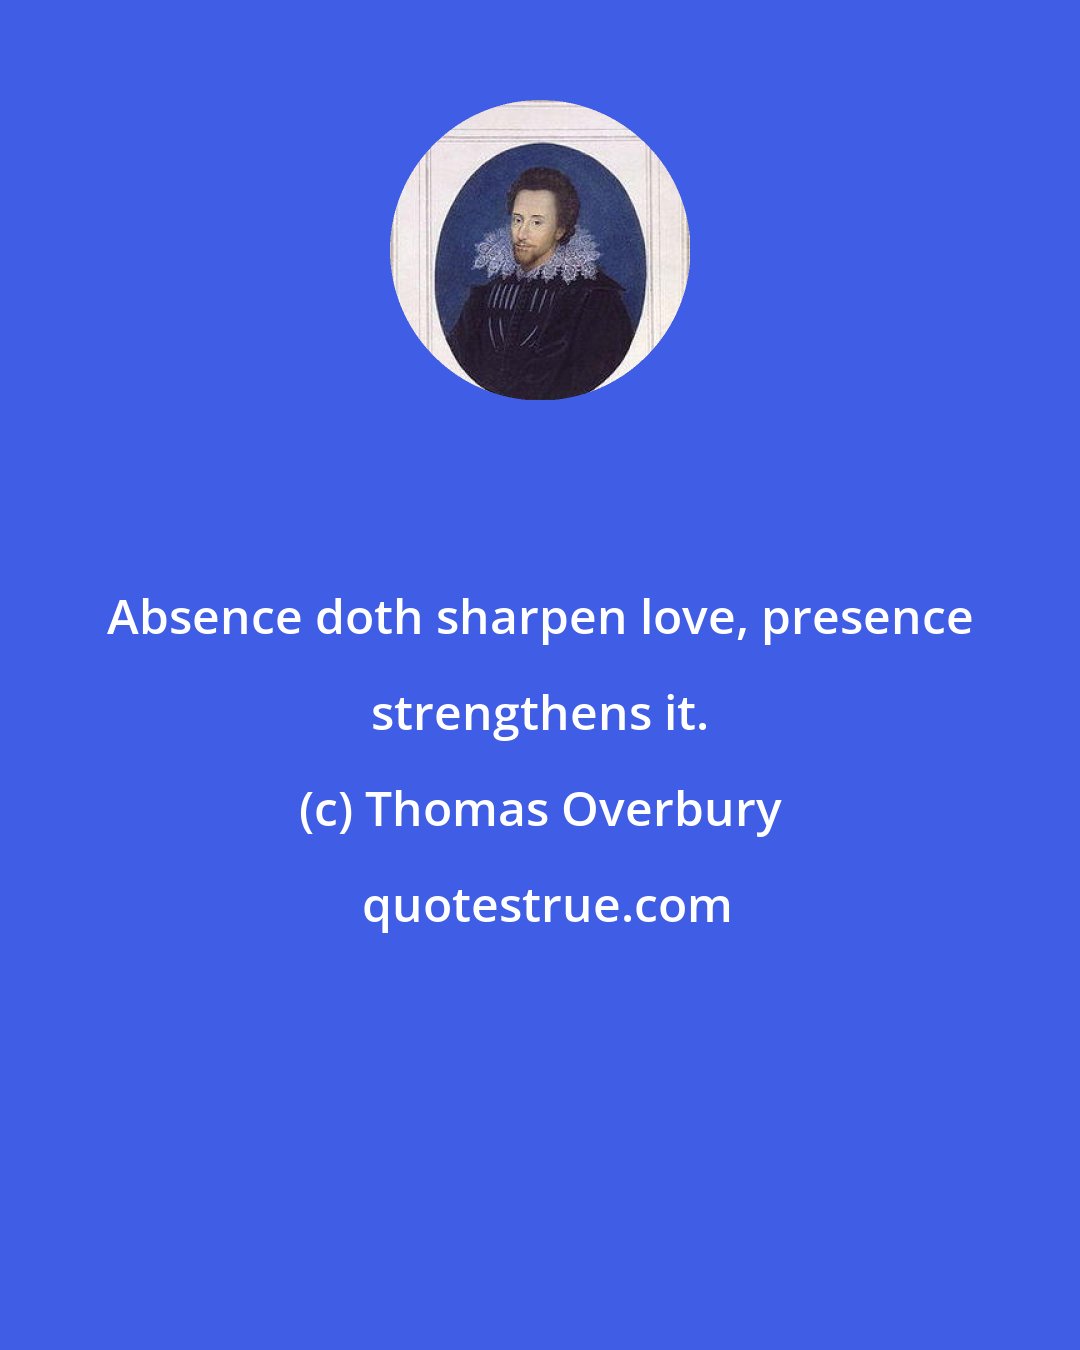 Thomas Overbury: Absence doth sharpen love, presence strengthens it.